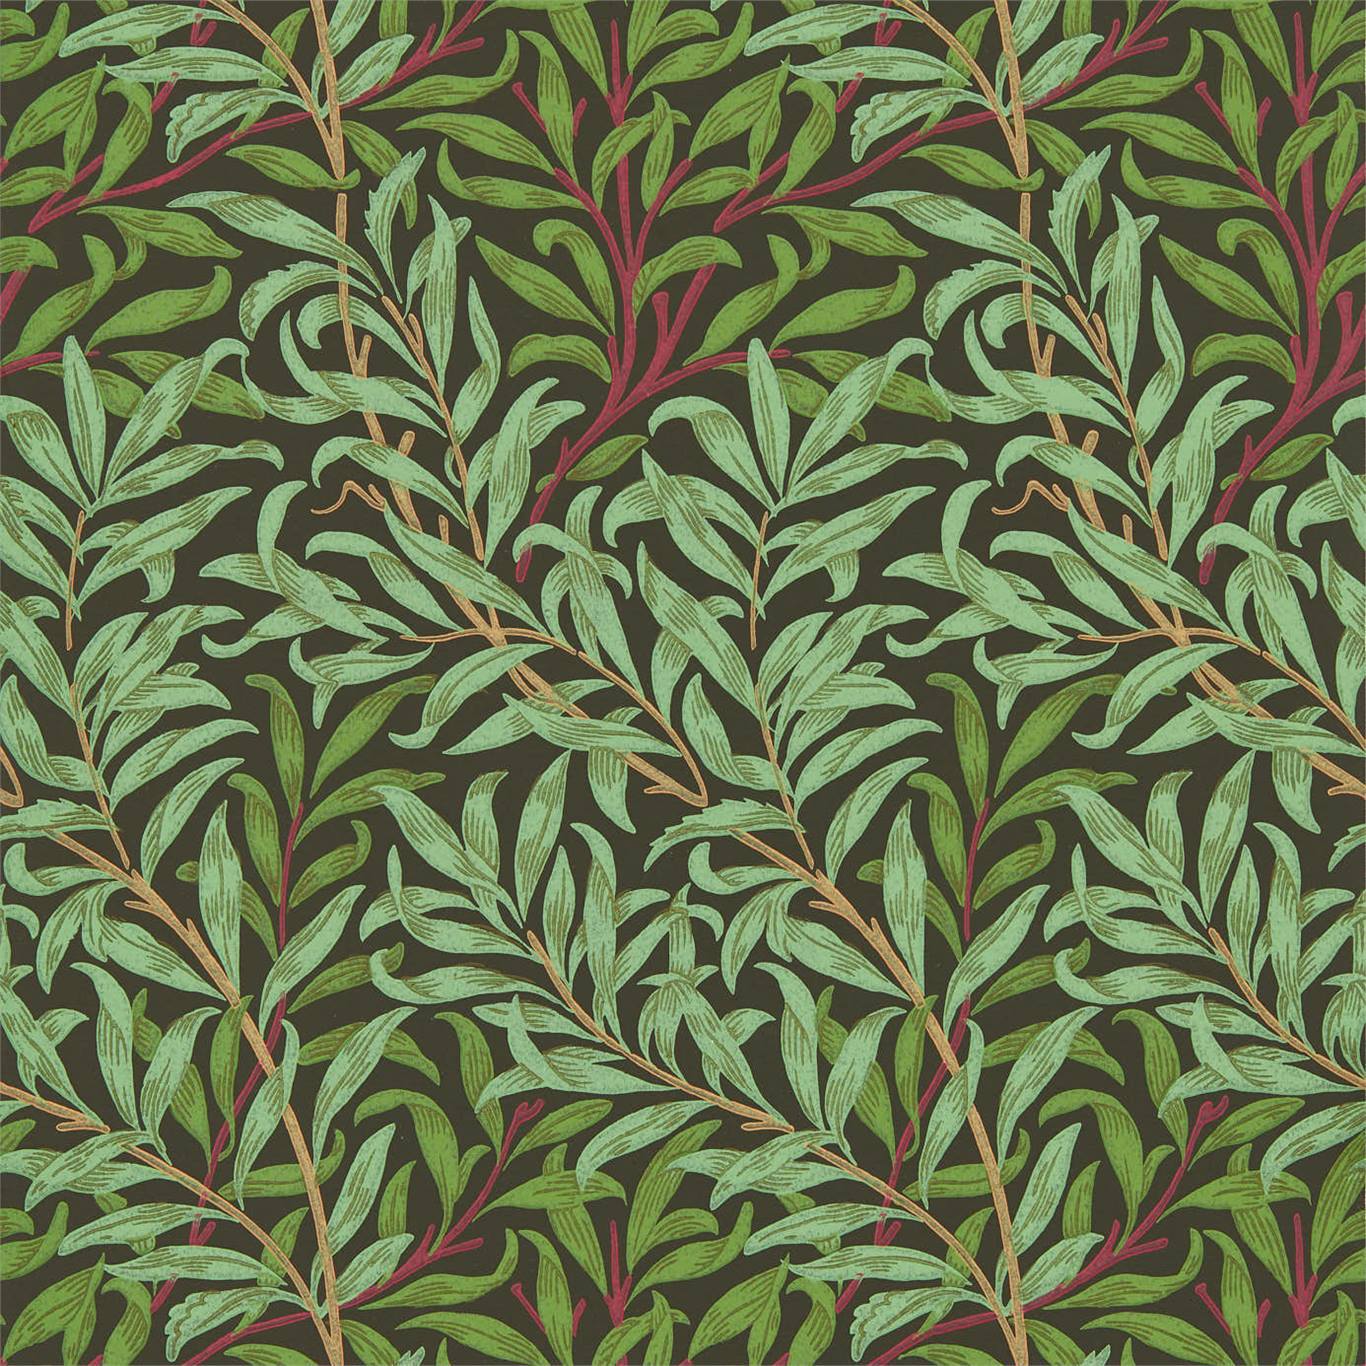 Willow Bough Bitter Chocolate Wallpaper DBPW216950 by Morris & Co